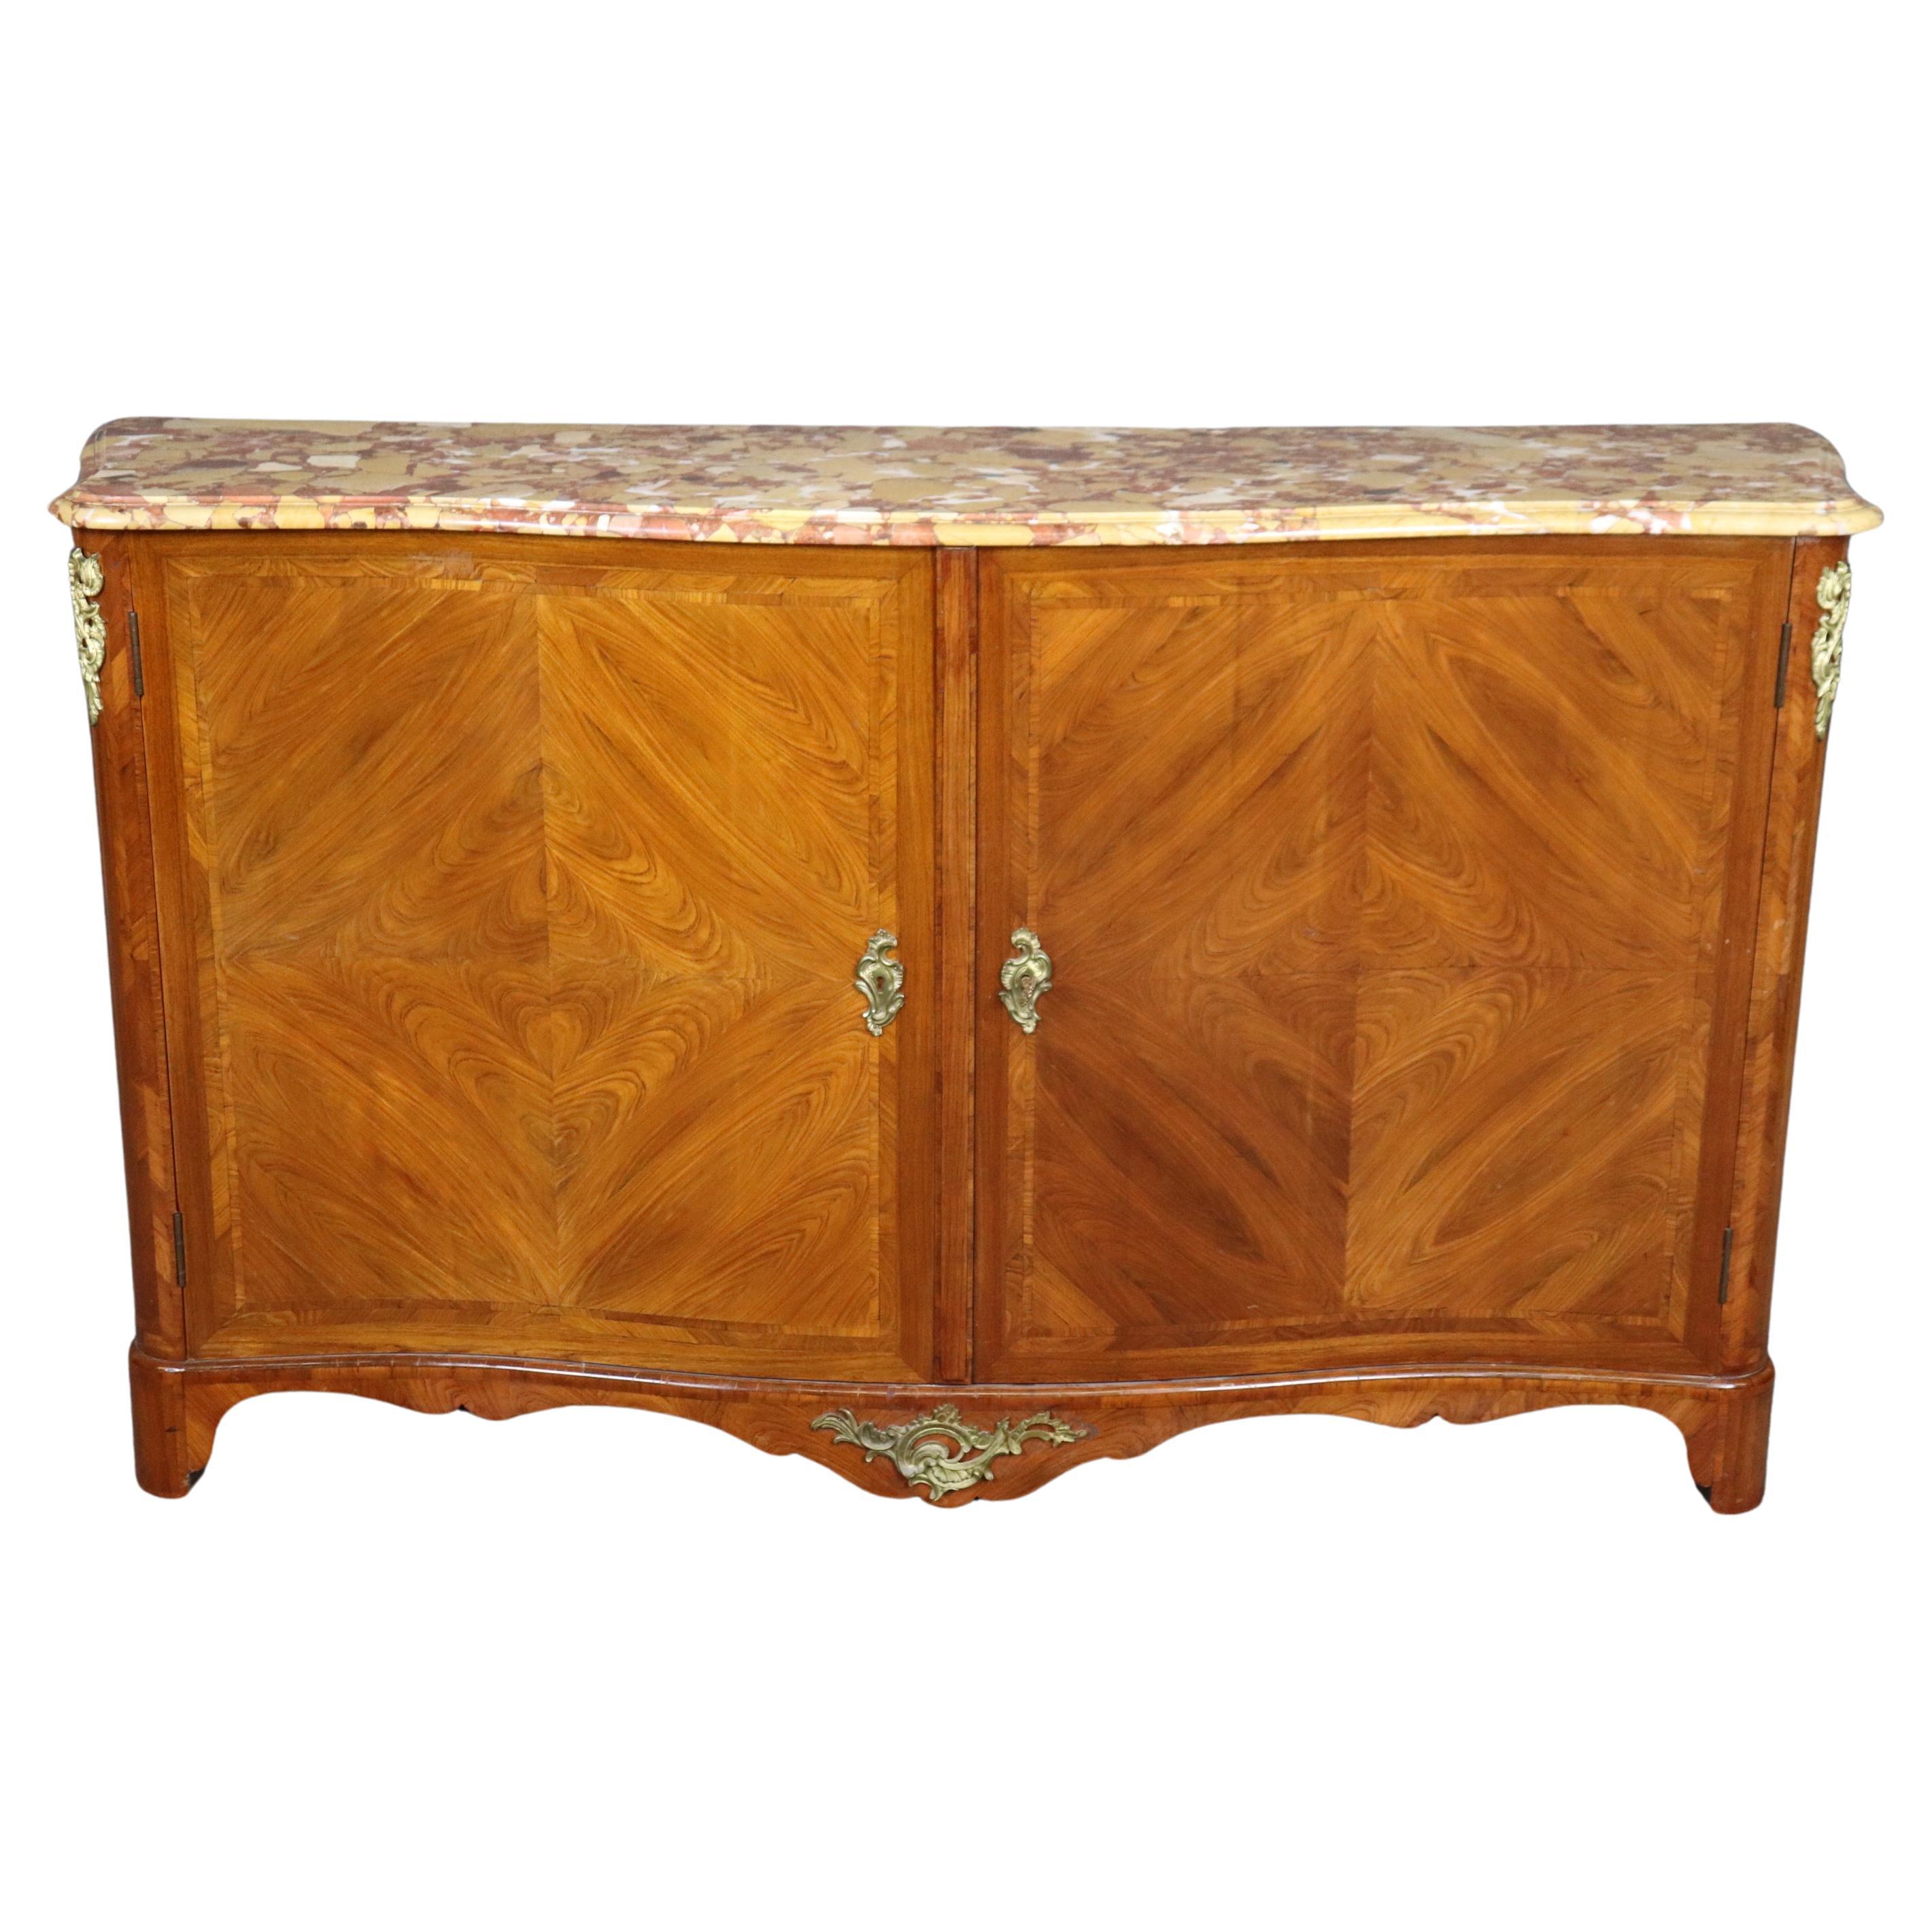 French Regence Louis XV Style Marble Top Bronze Mounted Sideboard